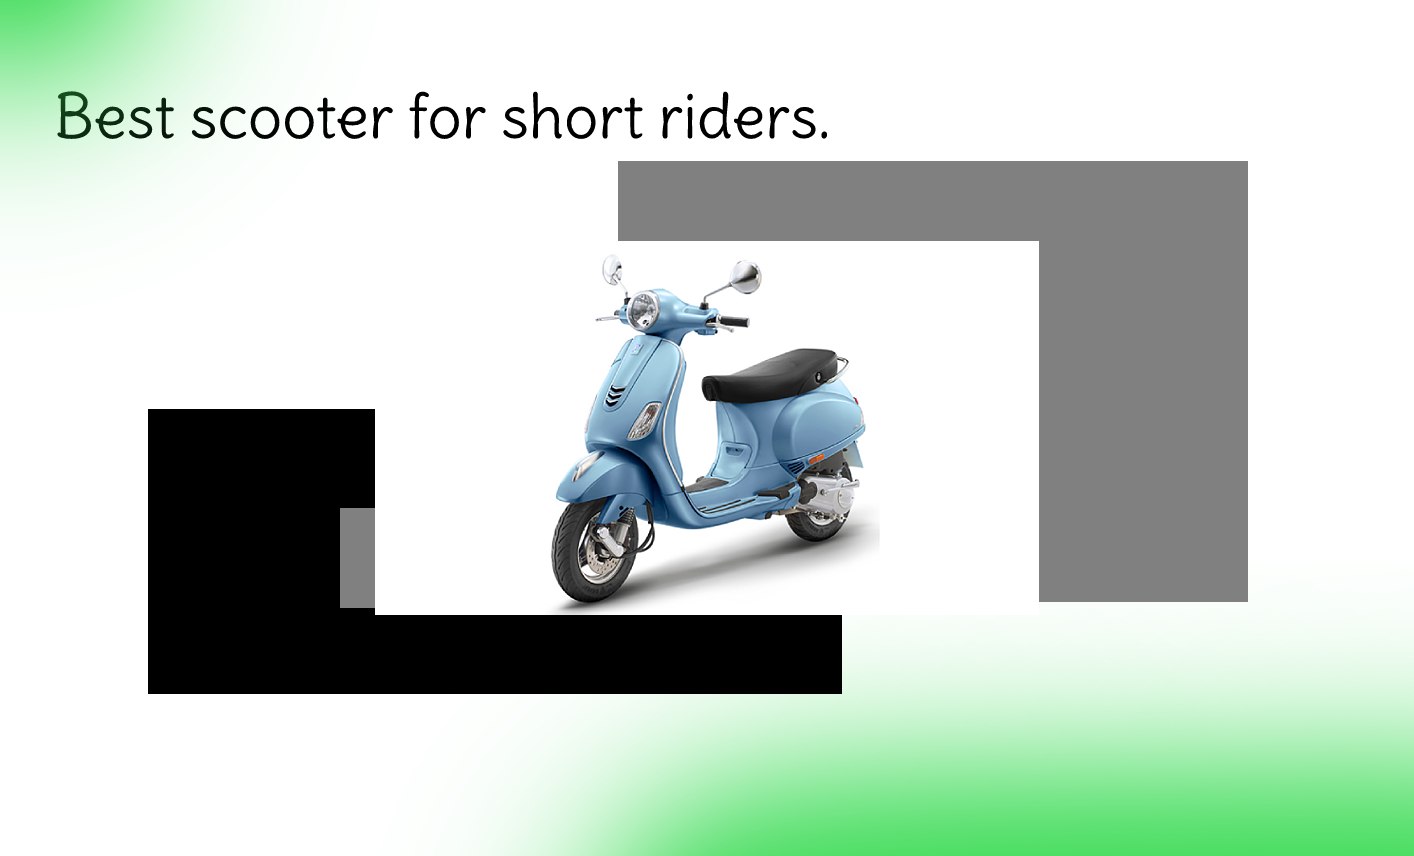 piaggio vespa is best scooter for short riders because of its size